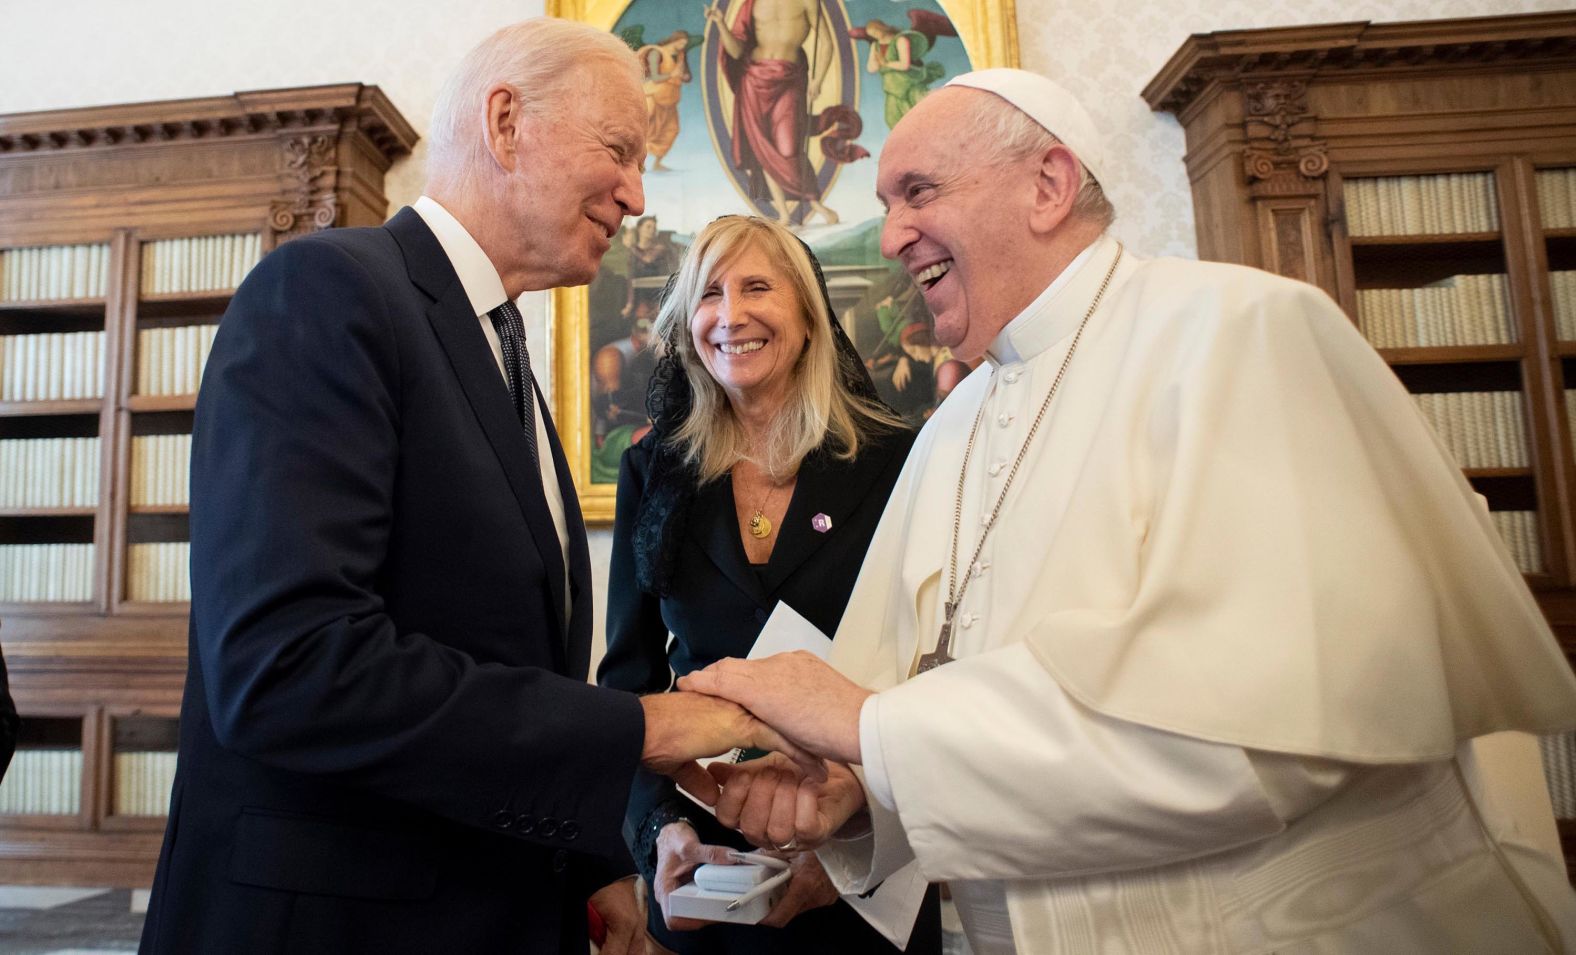 Biden gives Pope Francis a challenge coin during <a href="index.php?page=&url=https%3A%2F%2Fwww.cnn.com%2F2021%2F10%2F29%2Fpolitics%2Fpope-francis-joe-biden-meeting%2Findex.html" target="_blank">his trip to the Vatican</a> on Friday. "Now the tradition is — I'm only kidding about this — the next time I see you, if you don't have it you have to buy the drinks. I'm the only Irishman you've ever met who's never had a drink," Biden said to the Pope, who was laughing.